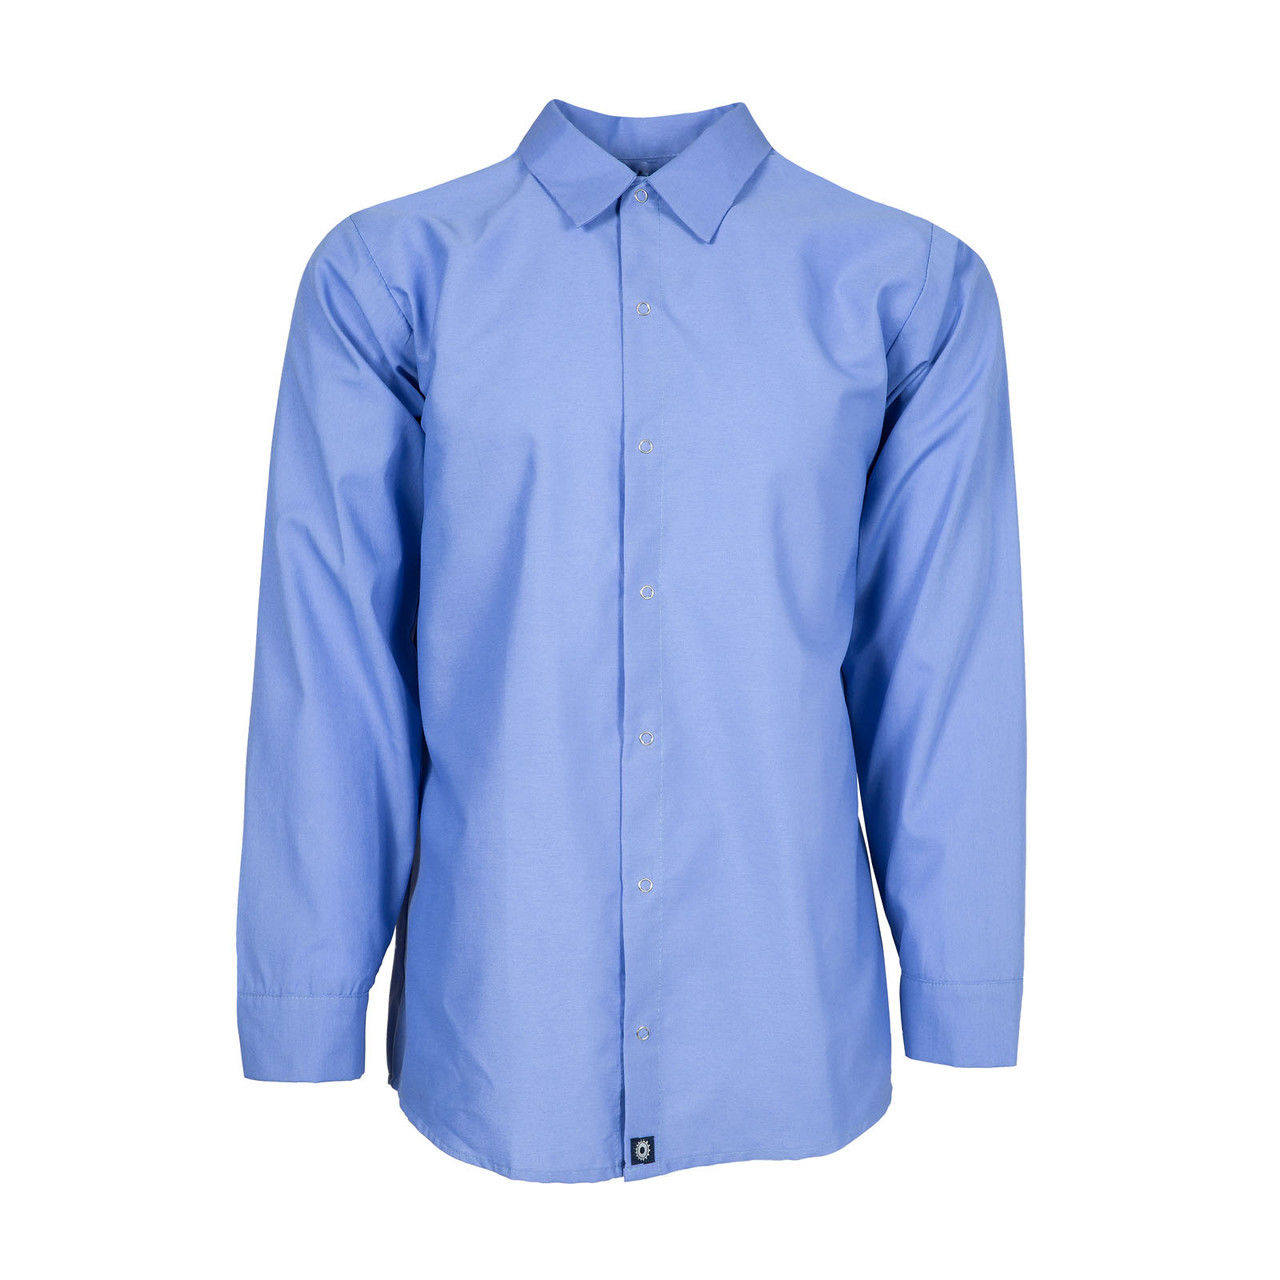 How would you describe the blue work shirt womens?